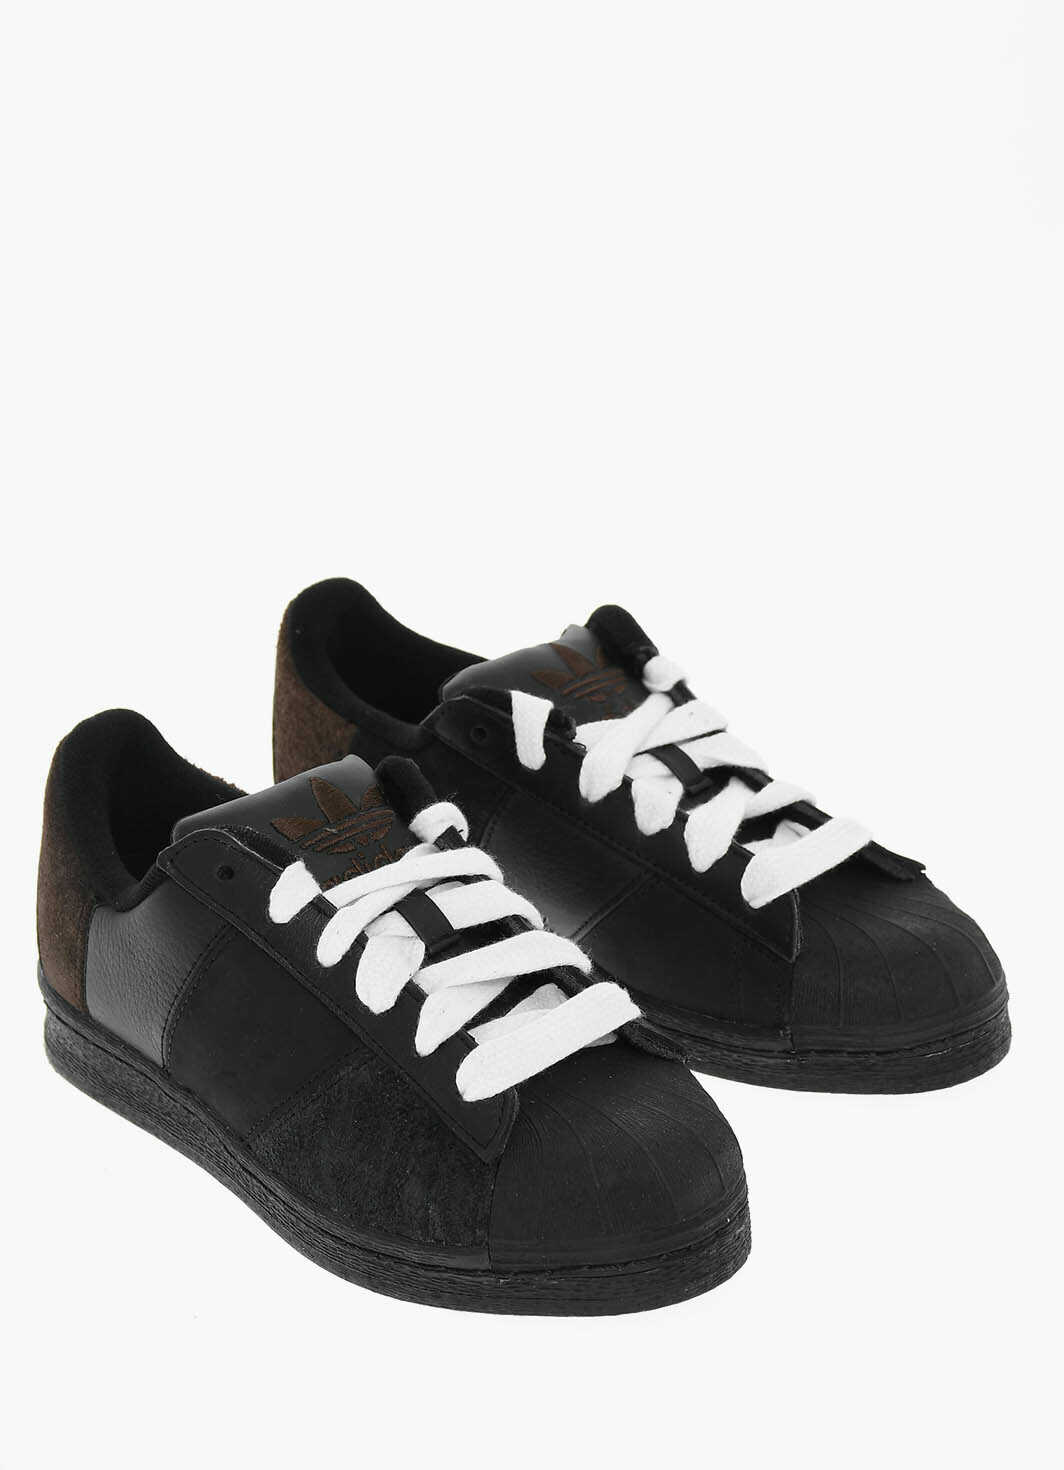 adidas Leather Superstar 82 Low-Top Sneakers Black